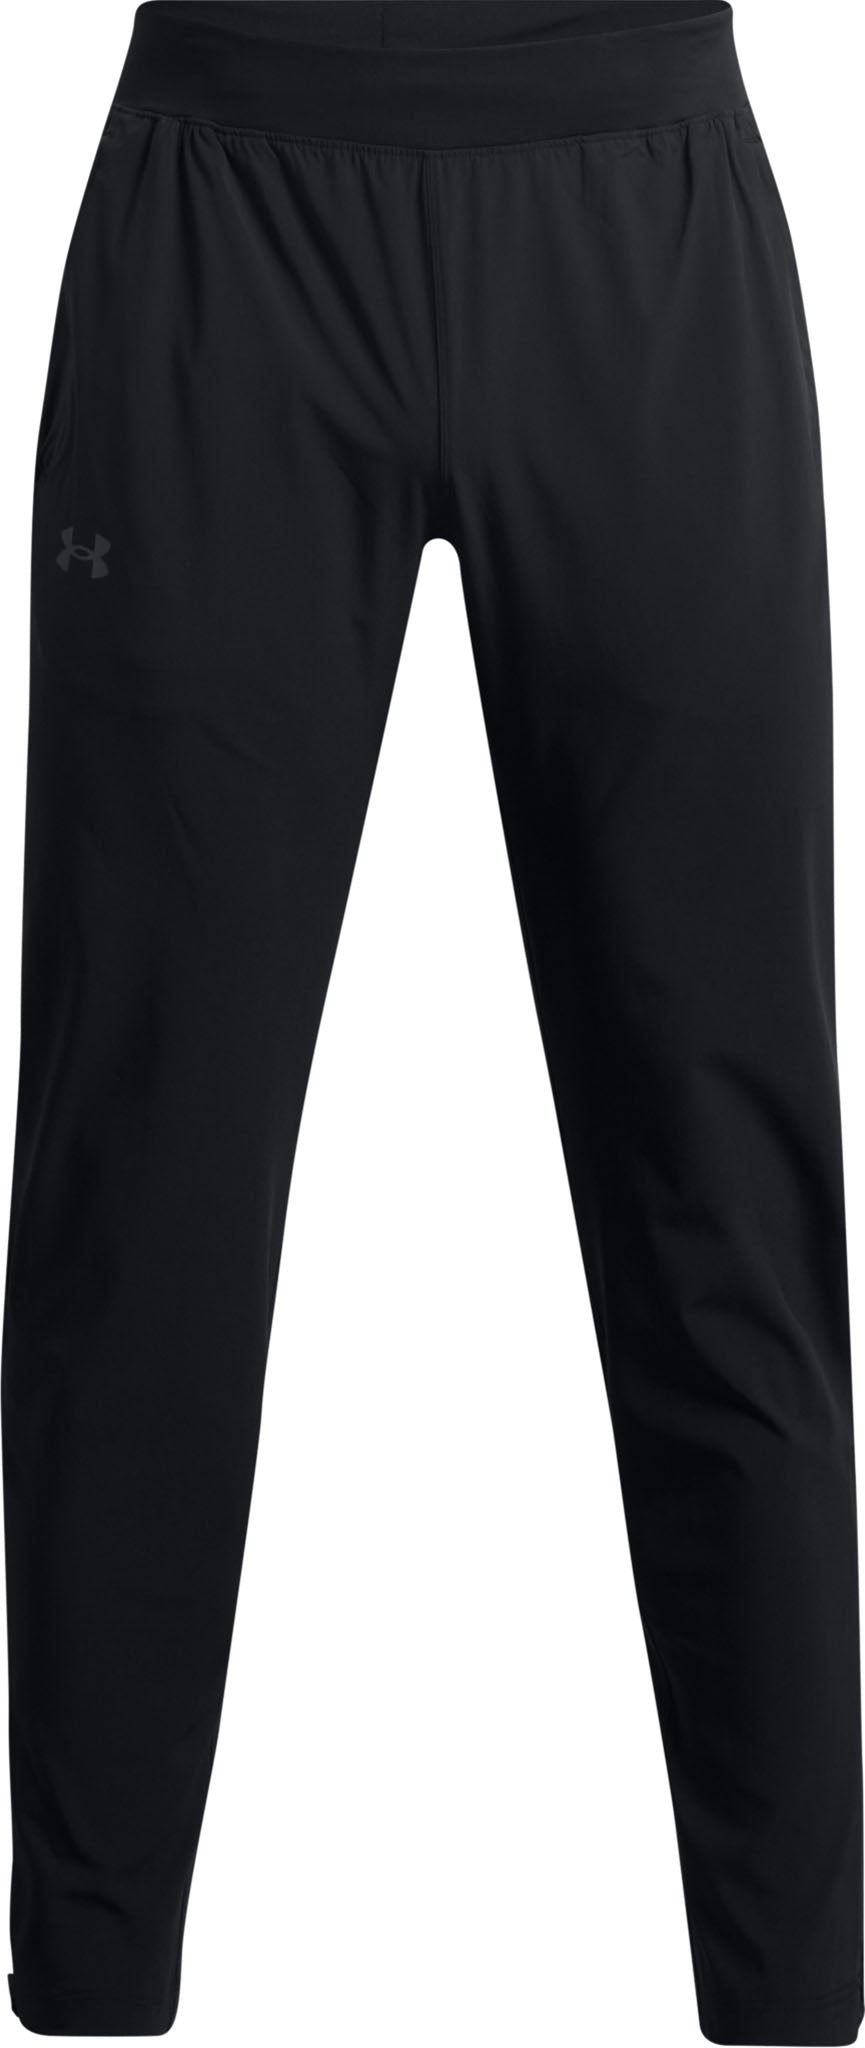 Under Armour, Out Run the Storm Womens Running Pant, Black